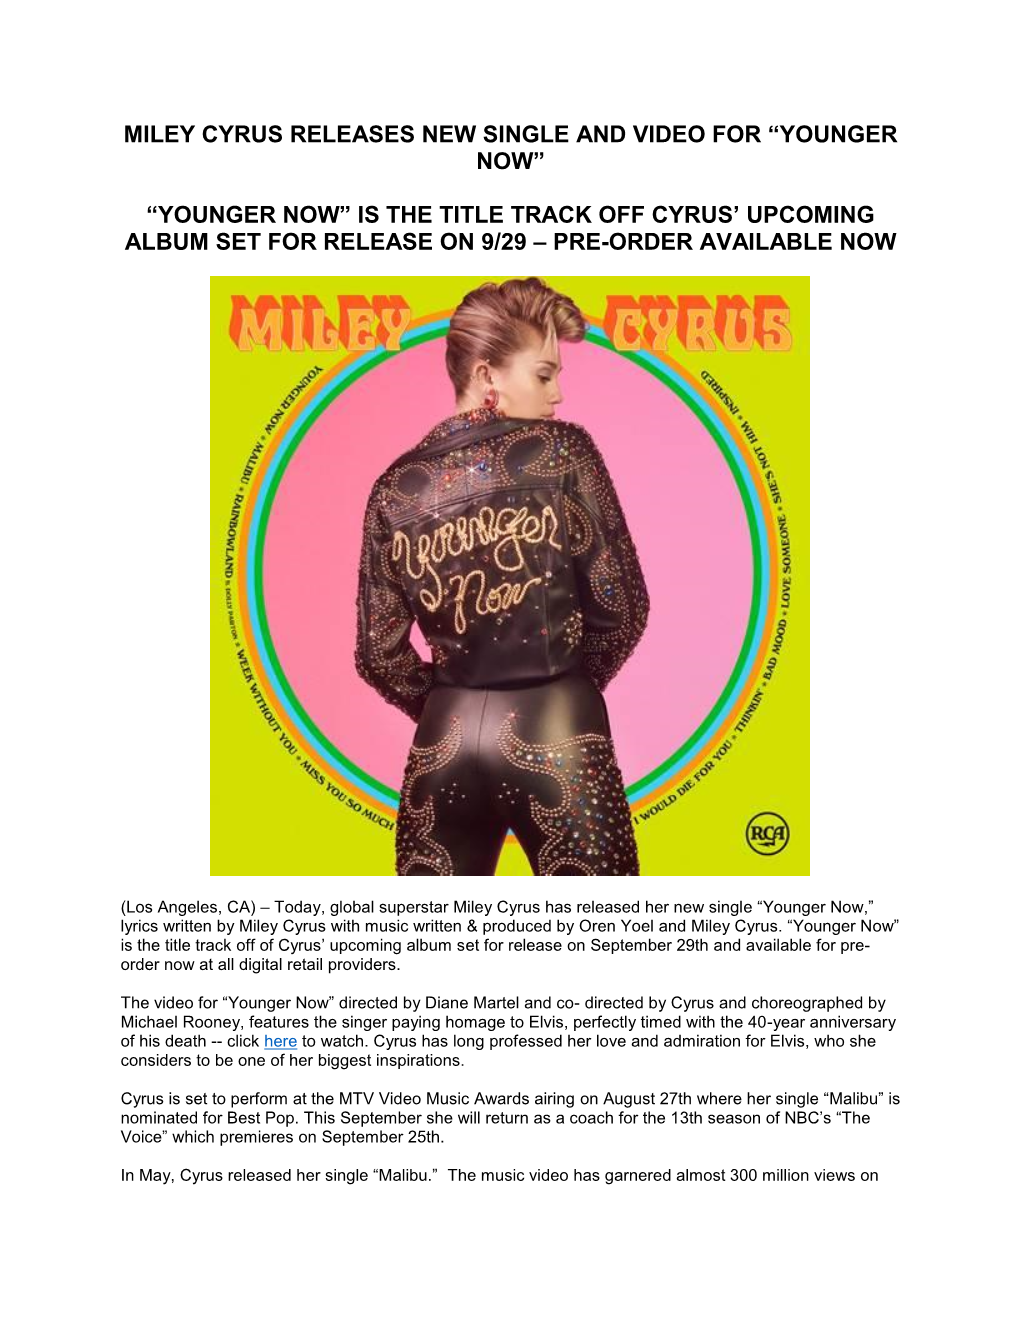 Miley Cyrus Releases New Single and Video for “Younger Now”